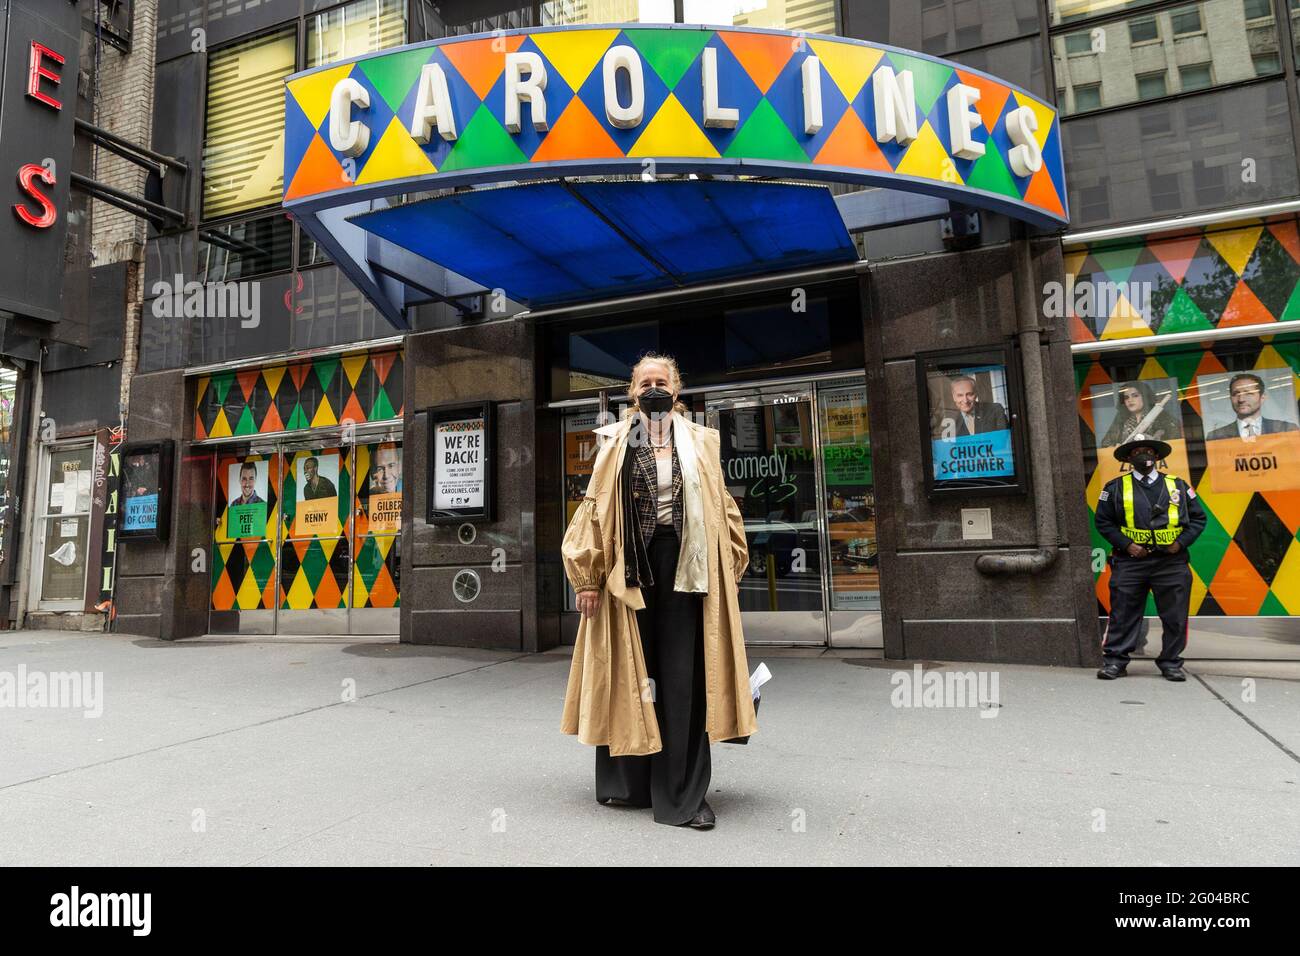 New York, United States. 31st May, 2021. Manhattan Borough President Gale Brewer arrives for Carolines on Broadway comedy club re-opening after pandemic ceremony in New York on May 31, 2021. (Photo by Lev Radin/Sipa USA) Credit: Sipa USA/Alamy Live News Stock Photo